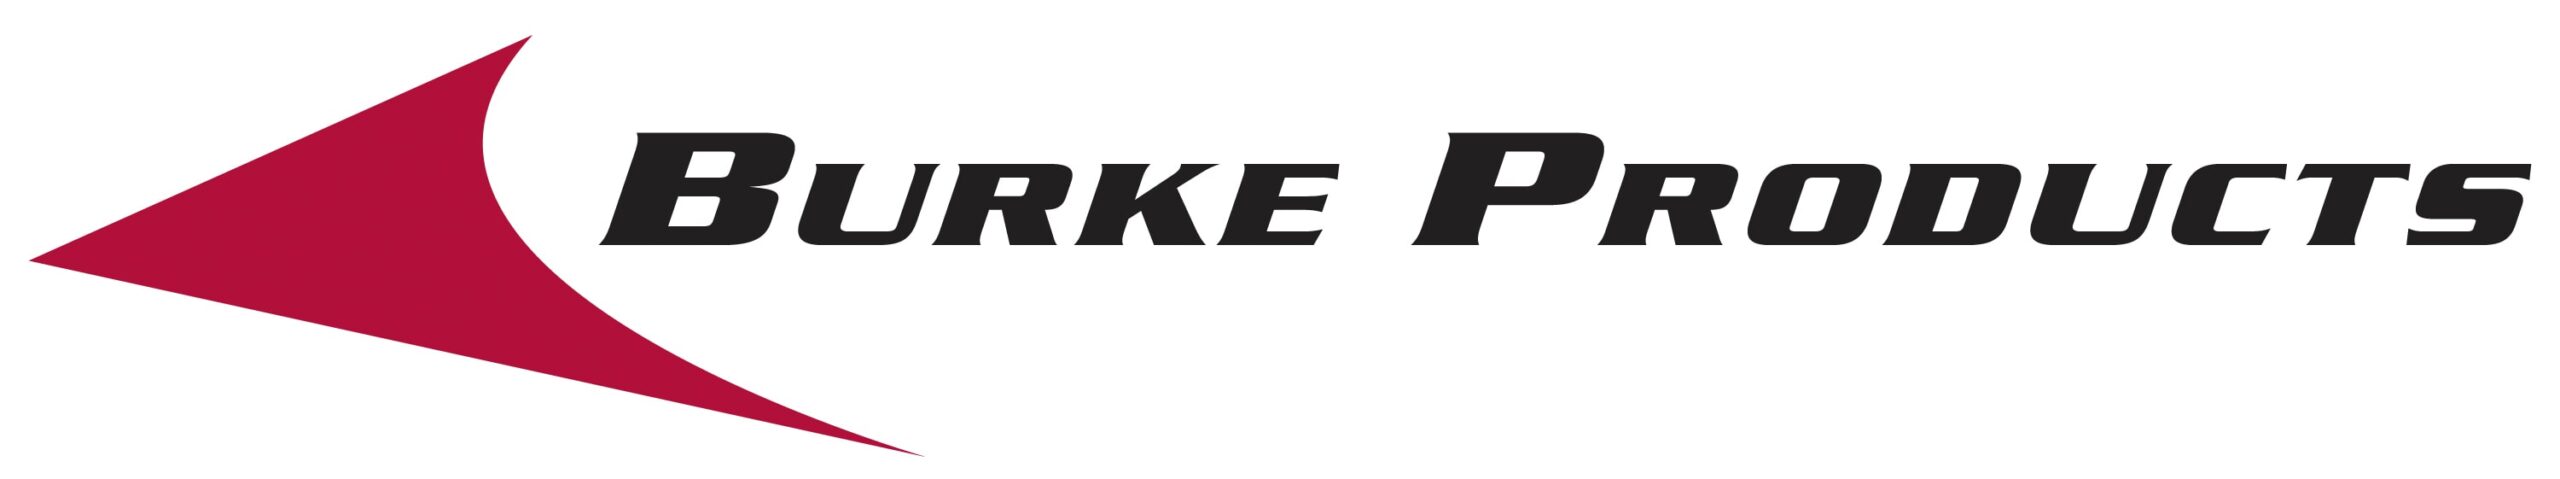 Burke Products